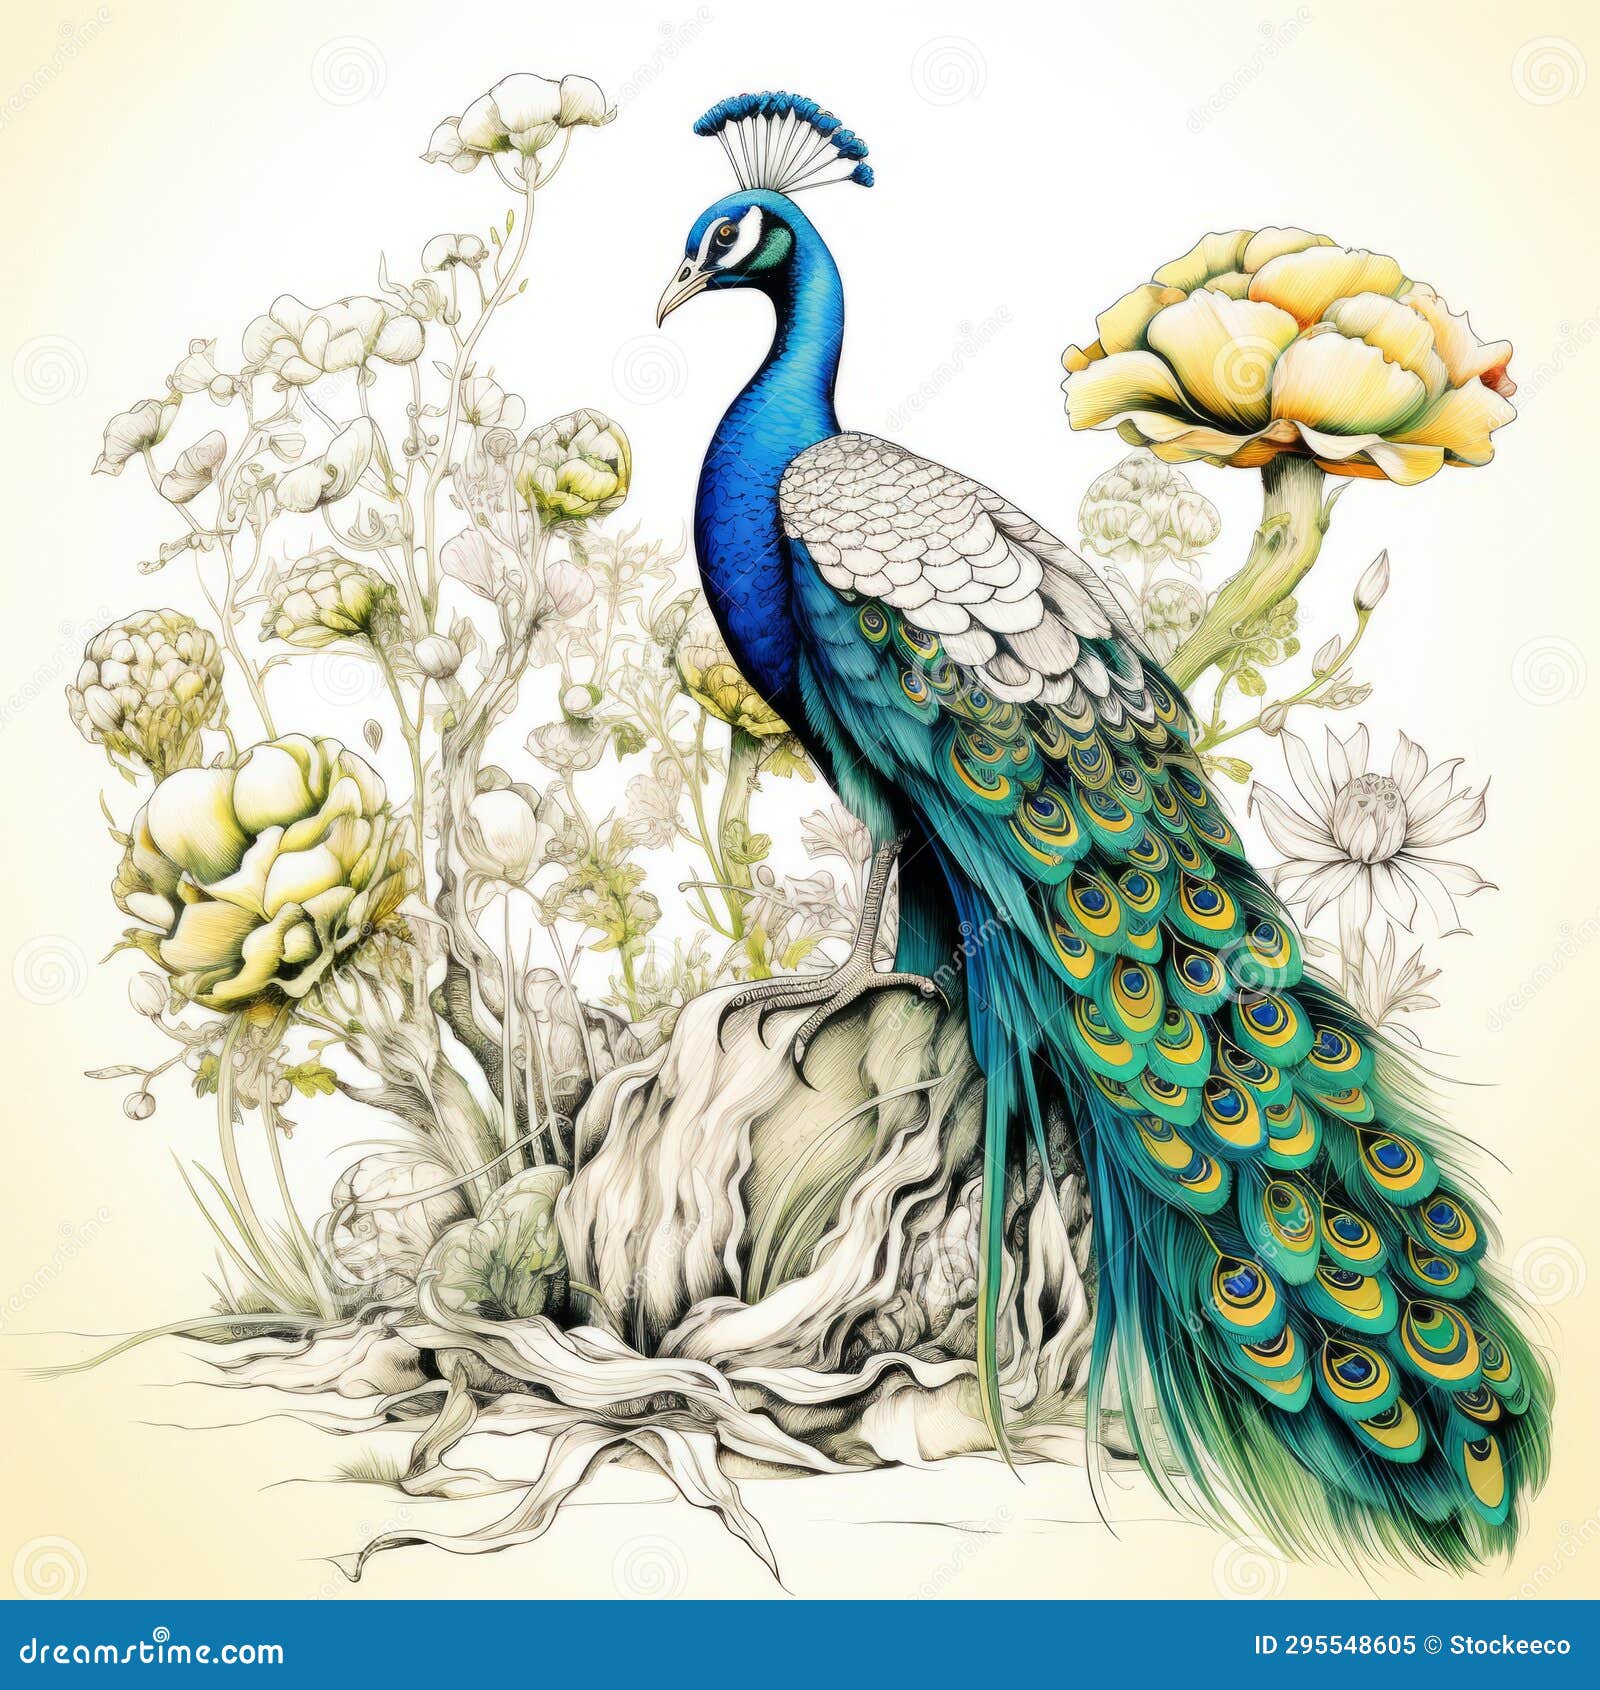 peafowl, peacock, bird, feather, exotic, green, nature, drawing, natural,  art | Pxfuel